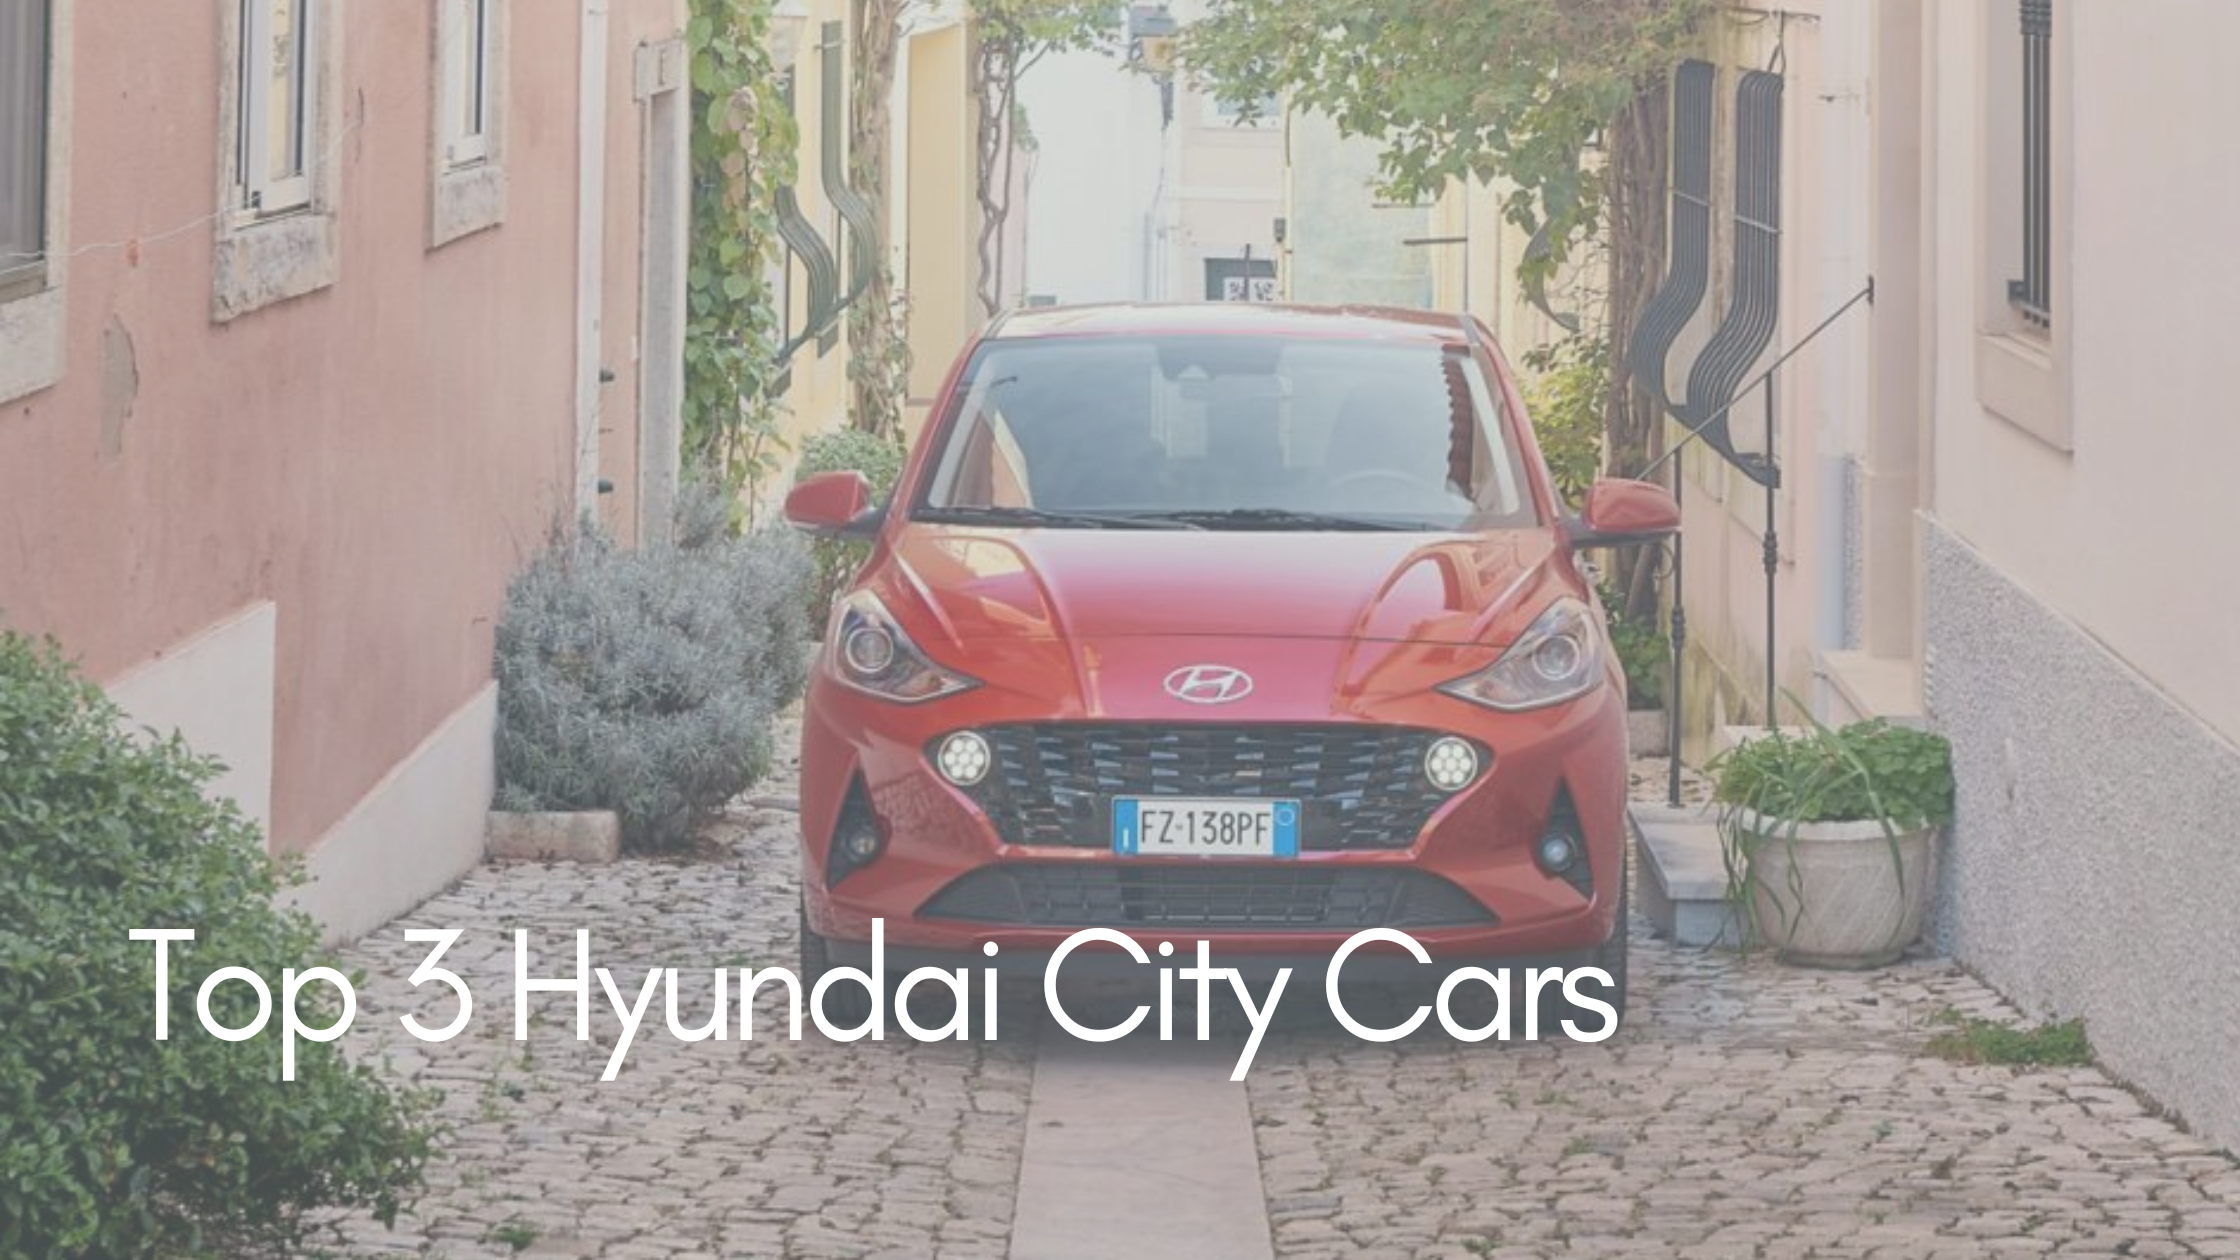 The Top 3 Hyundai Cars for City Driving